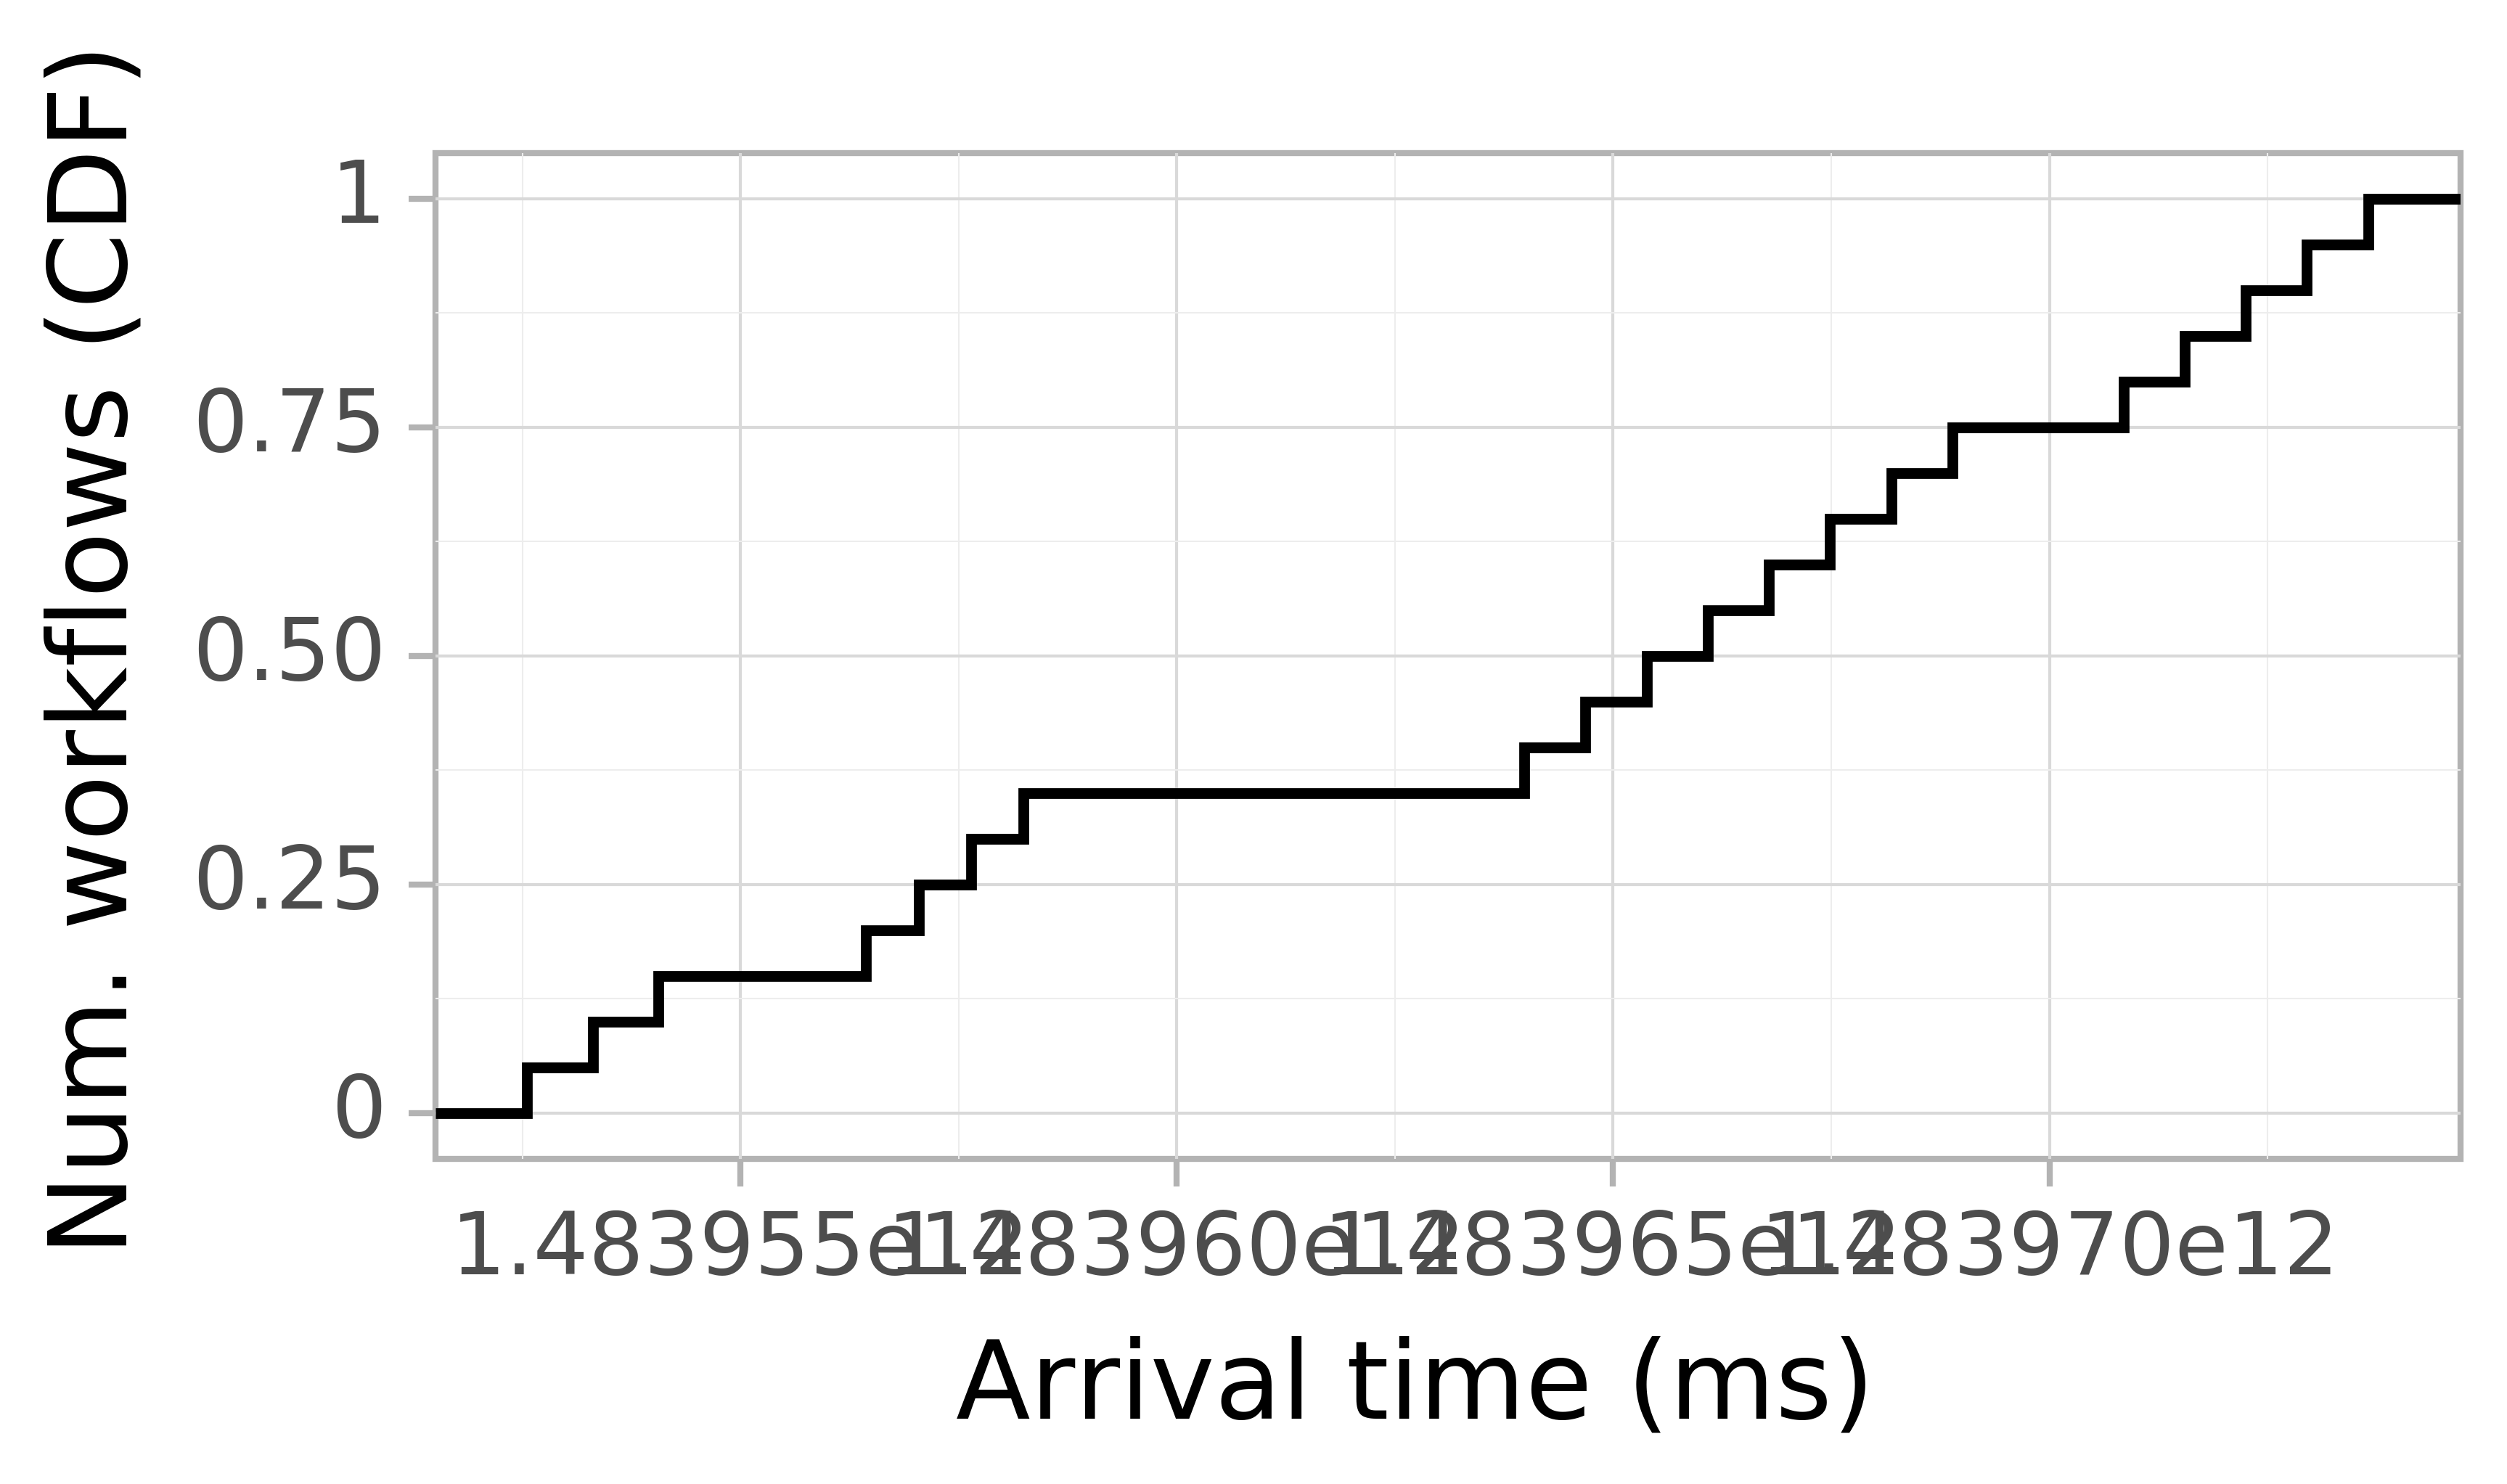 Job arrival CDF graph for the askalon-new_ee15 trace.